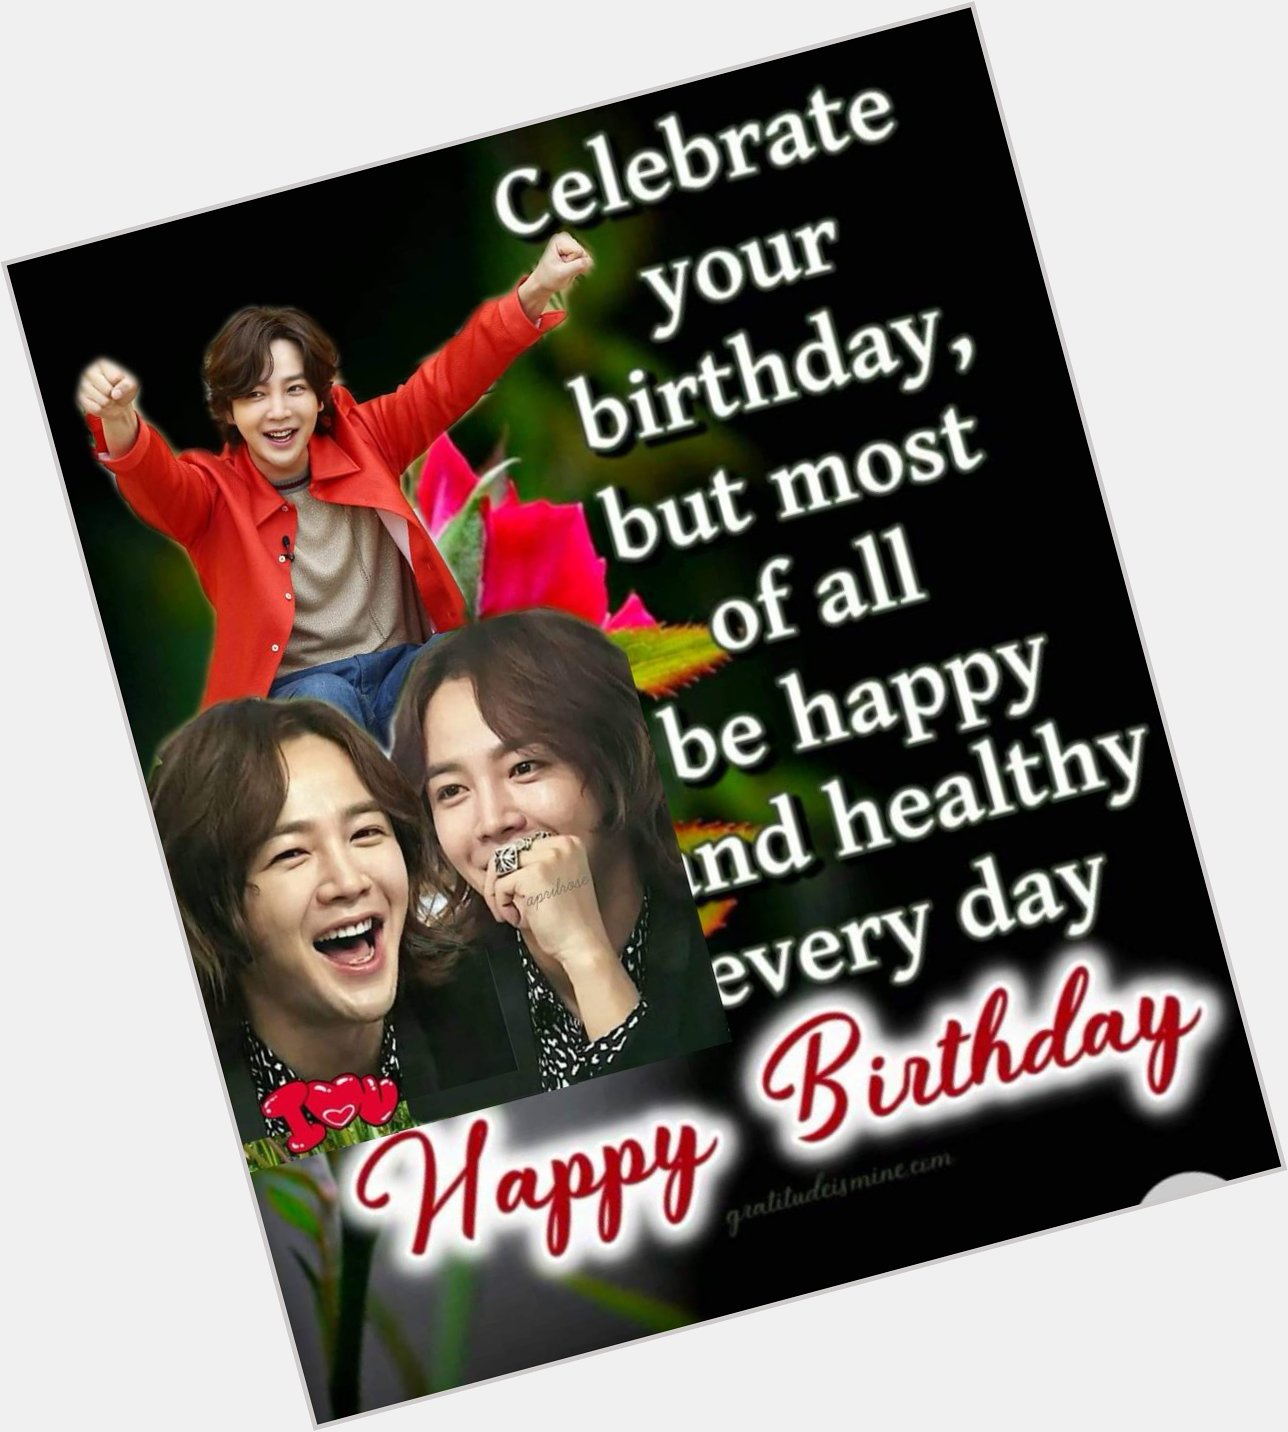 Happy happy birthday my 
Prince Jang Keun Suk 
Wishing you all the best in life always healthy and be safe... 